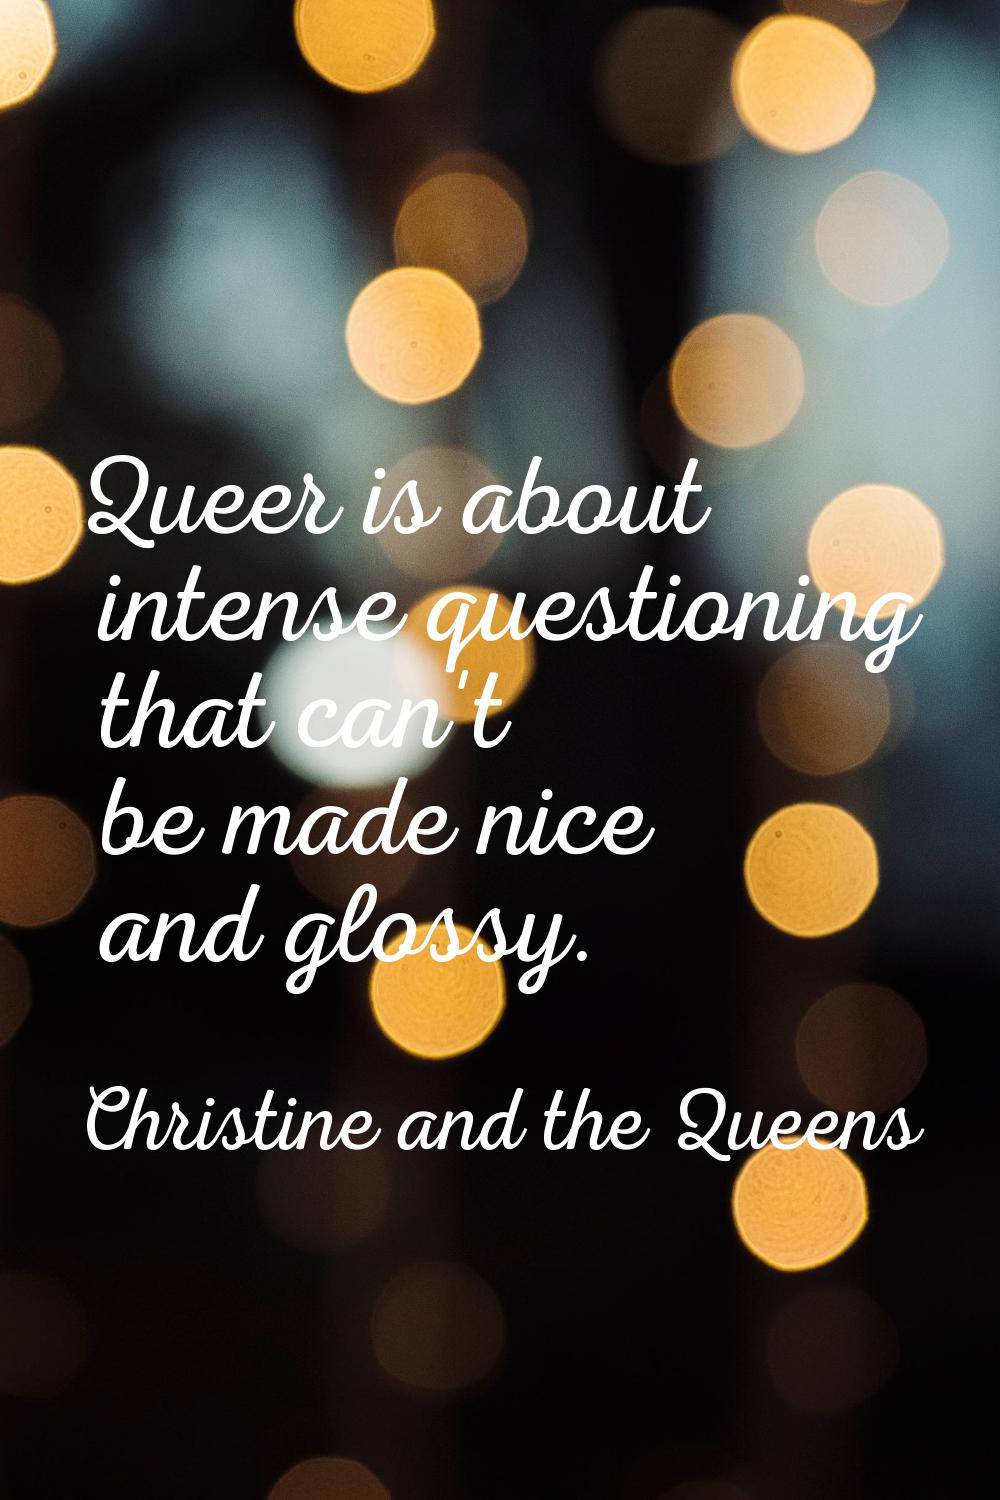 Queer is about intense questioning that can't be made nice and glossy.